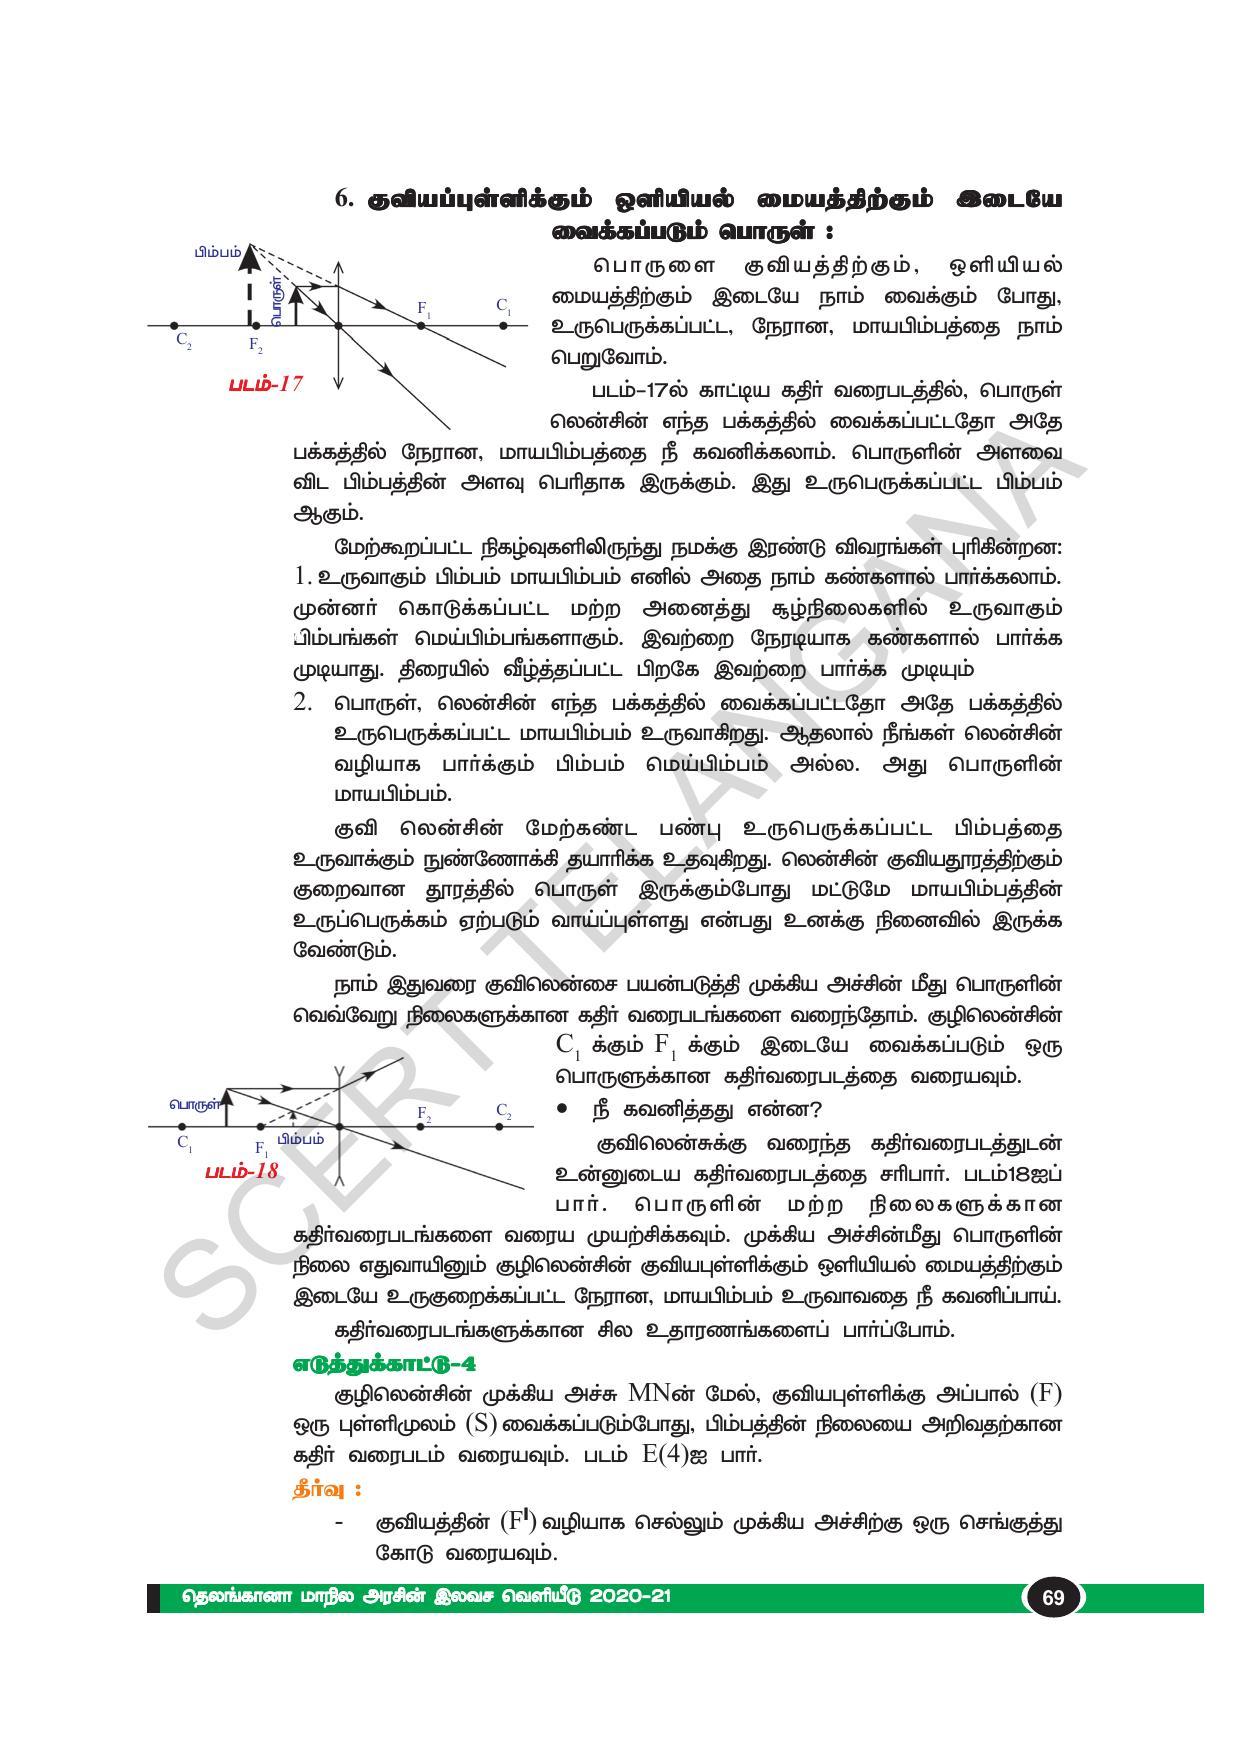 TS SCERT Class 10 Physical Science(Tamil Medium) Text Book - Page 81